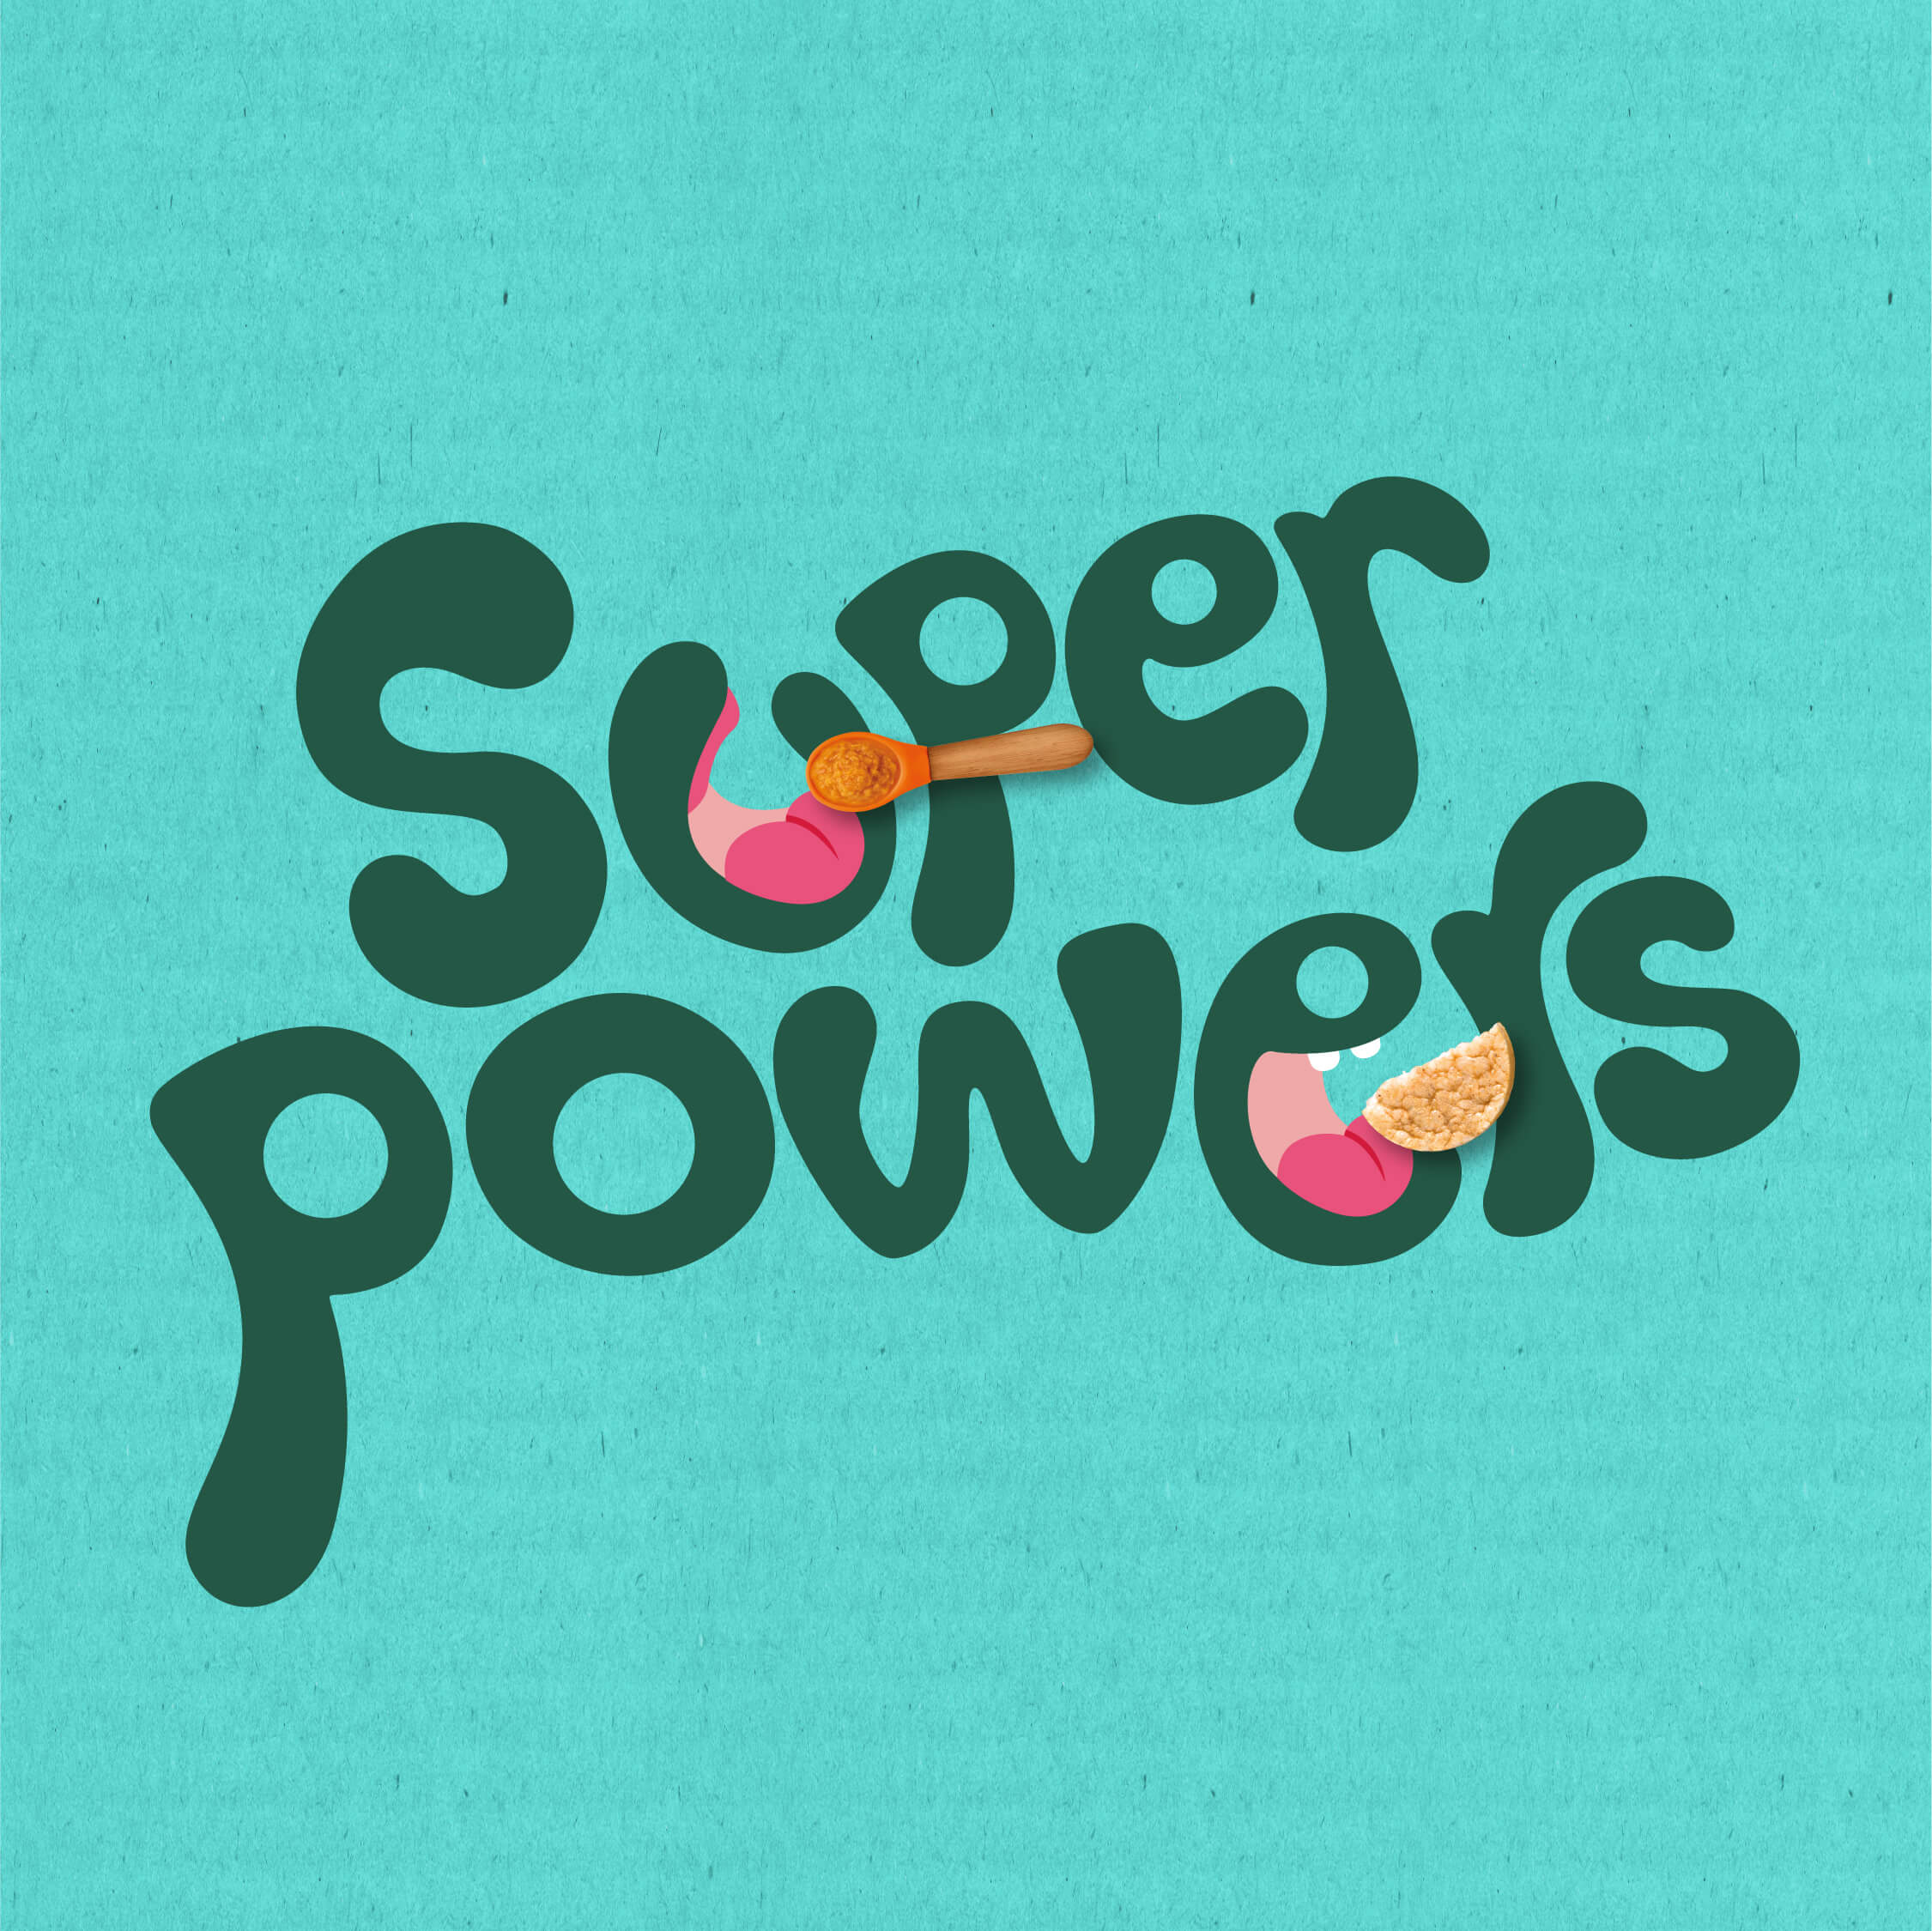 Organix green text that says &quot;super powers&quot; on a blue background